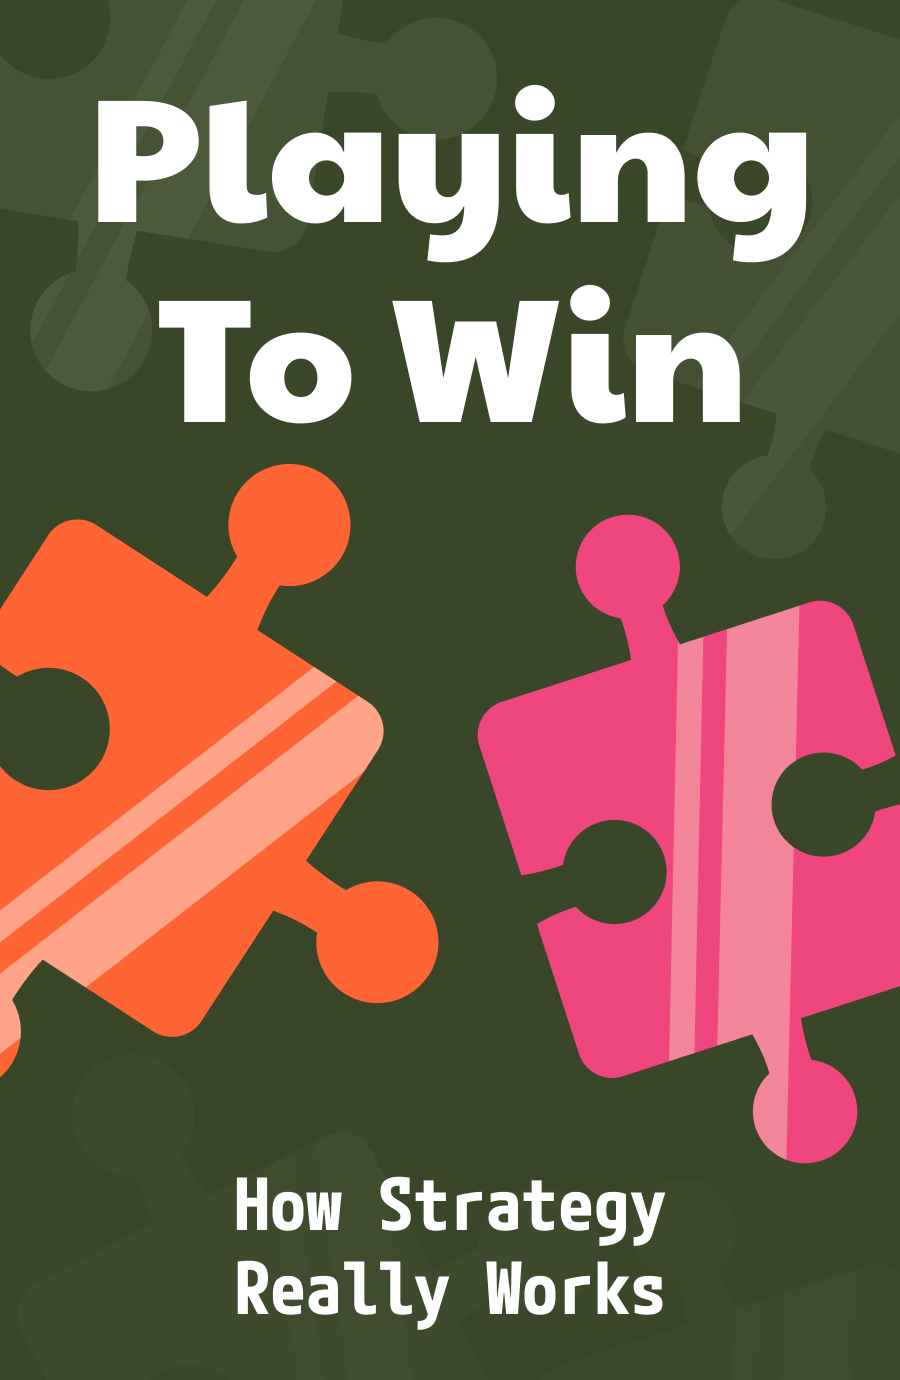 Playing to win: How Strategy Really Works Book Cover